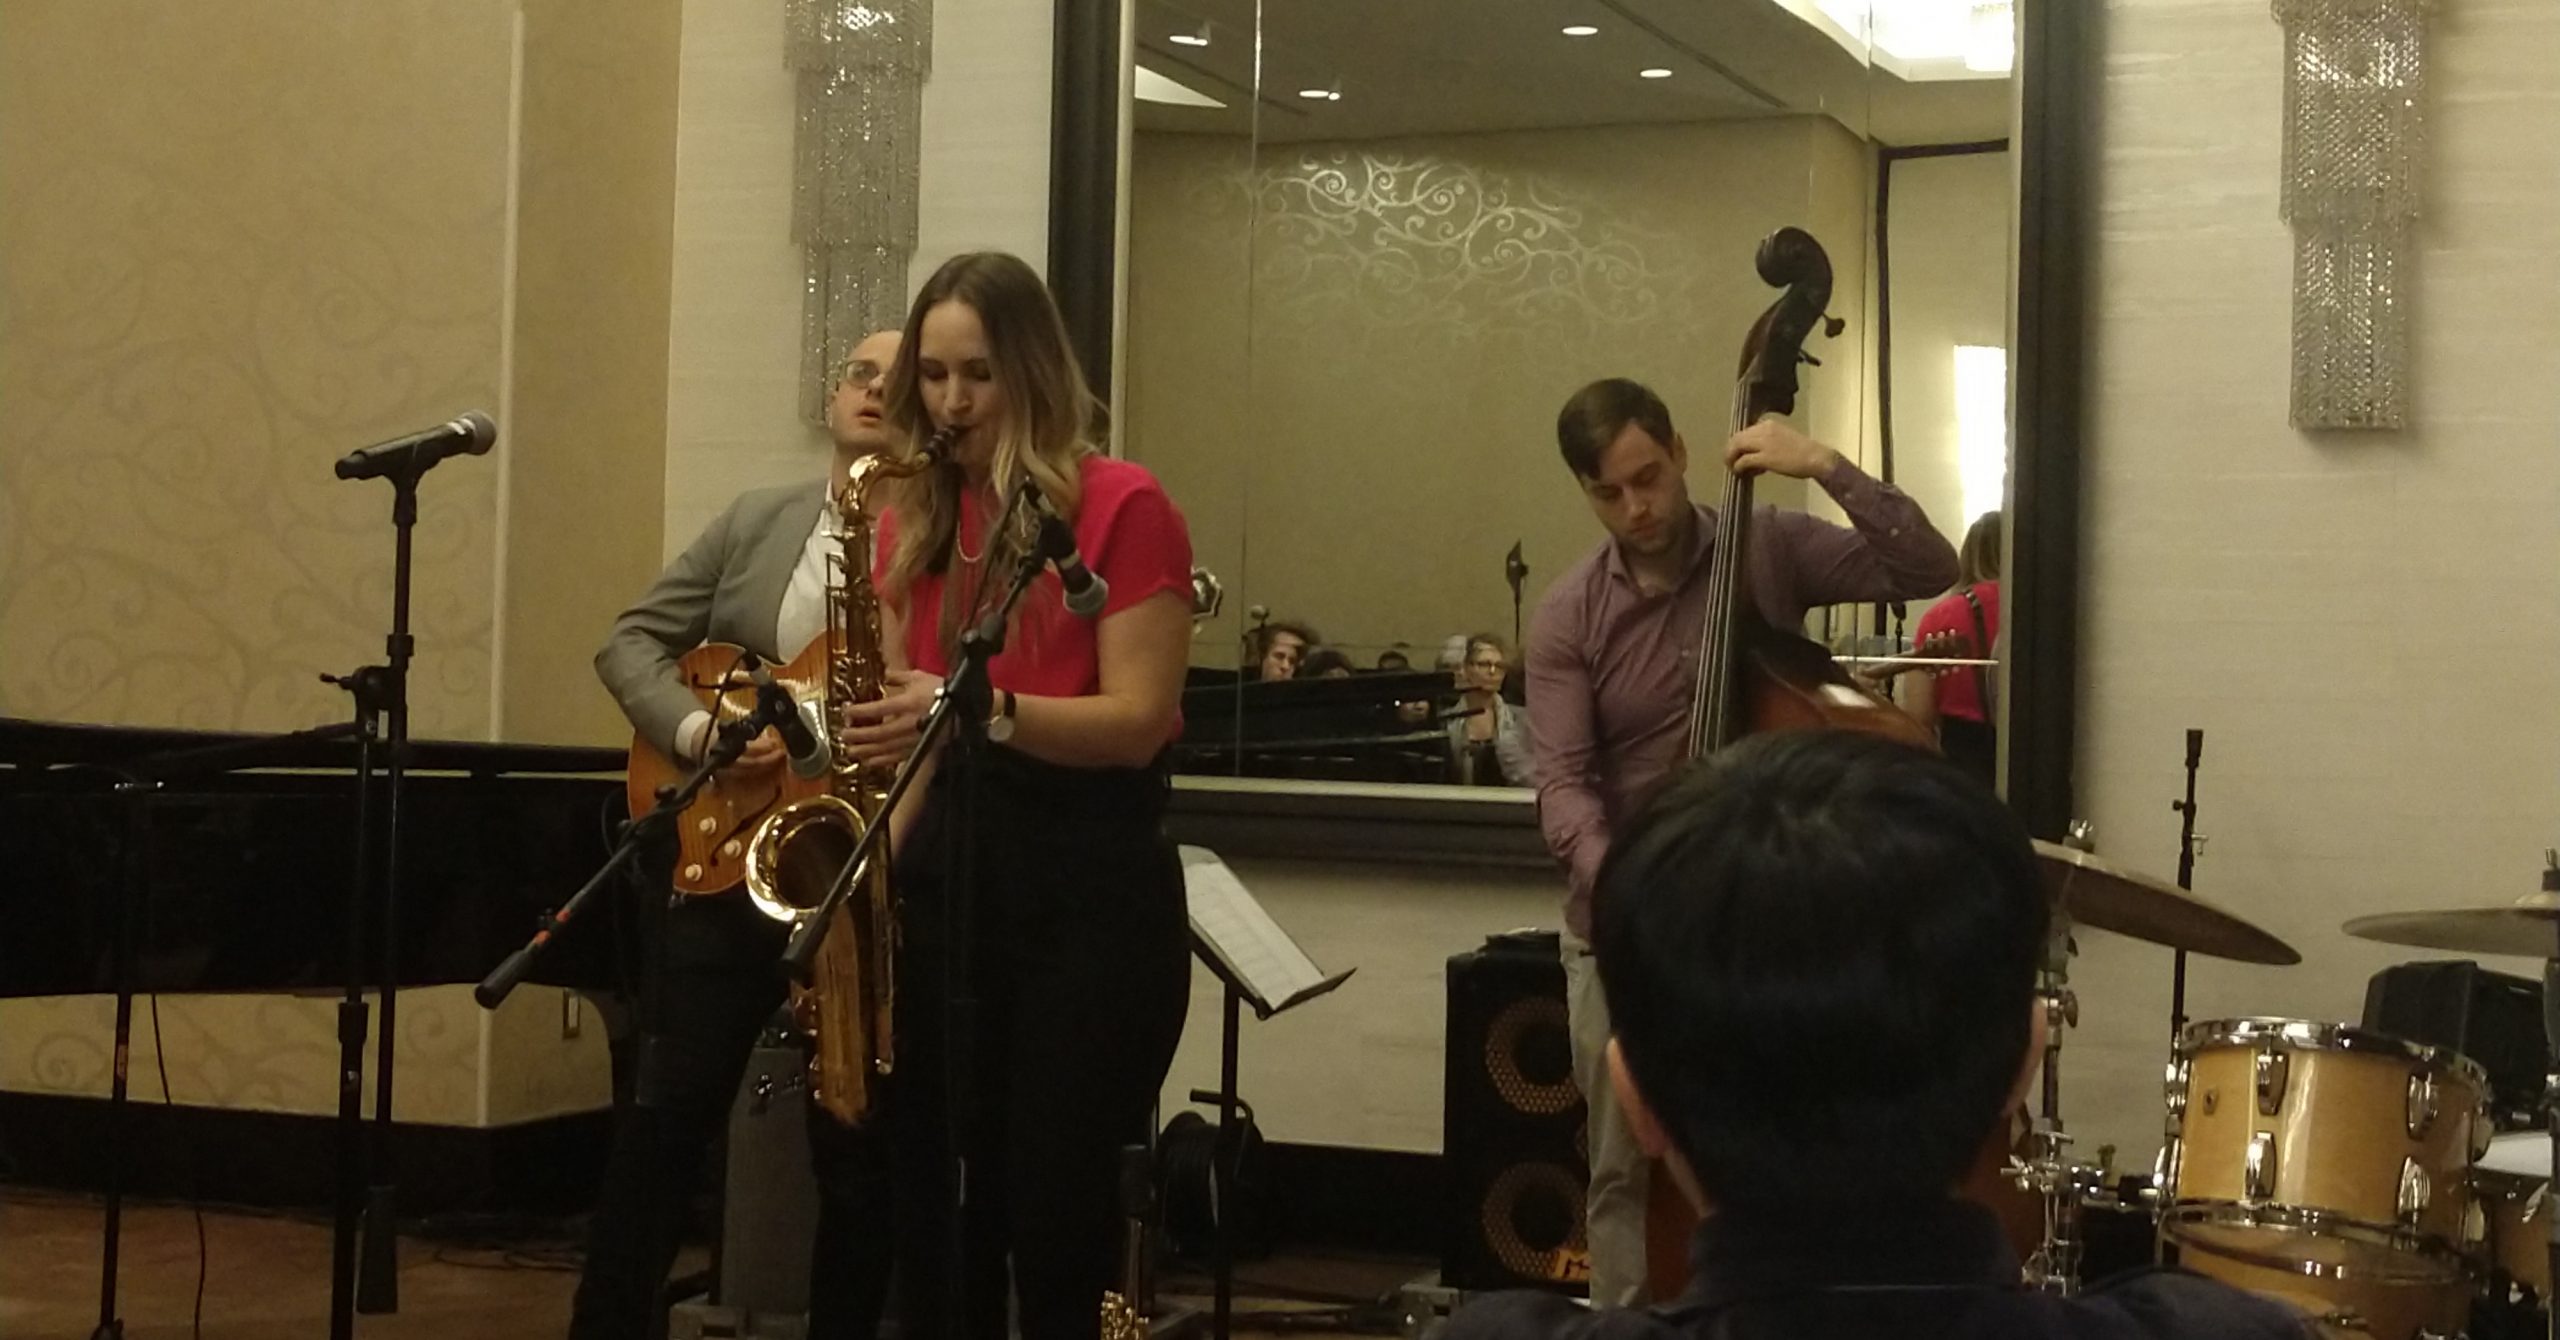 Roxy Coss performing on saxophone with members of her Quintet.